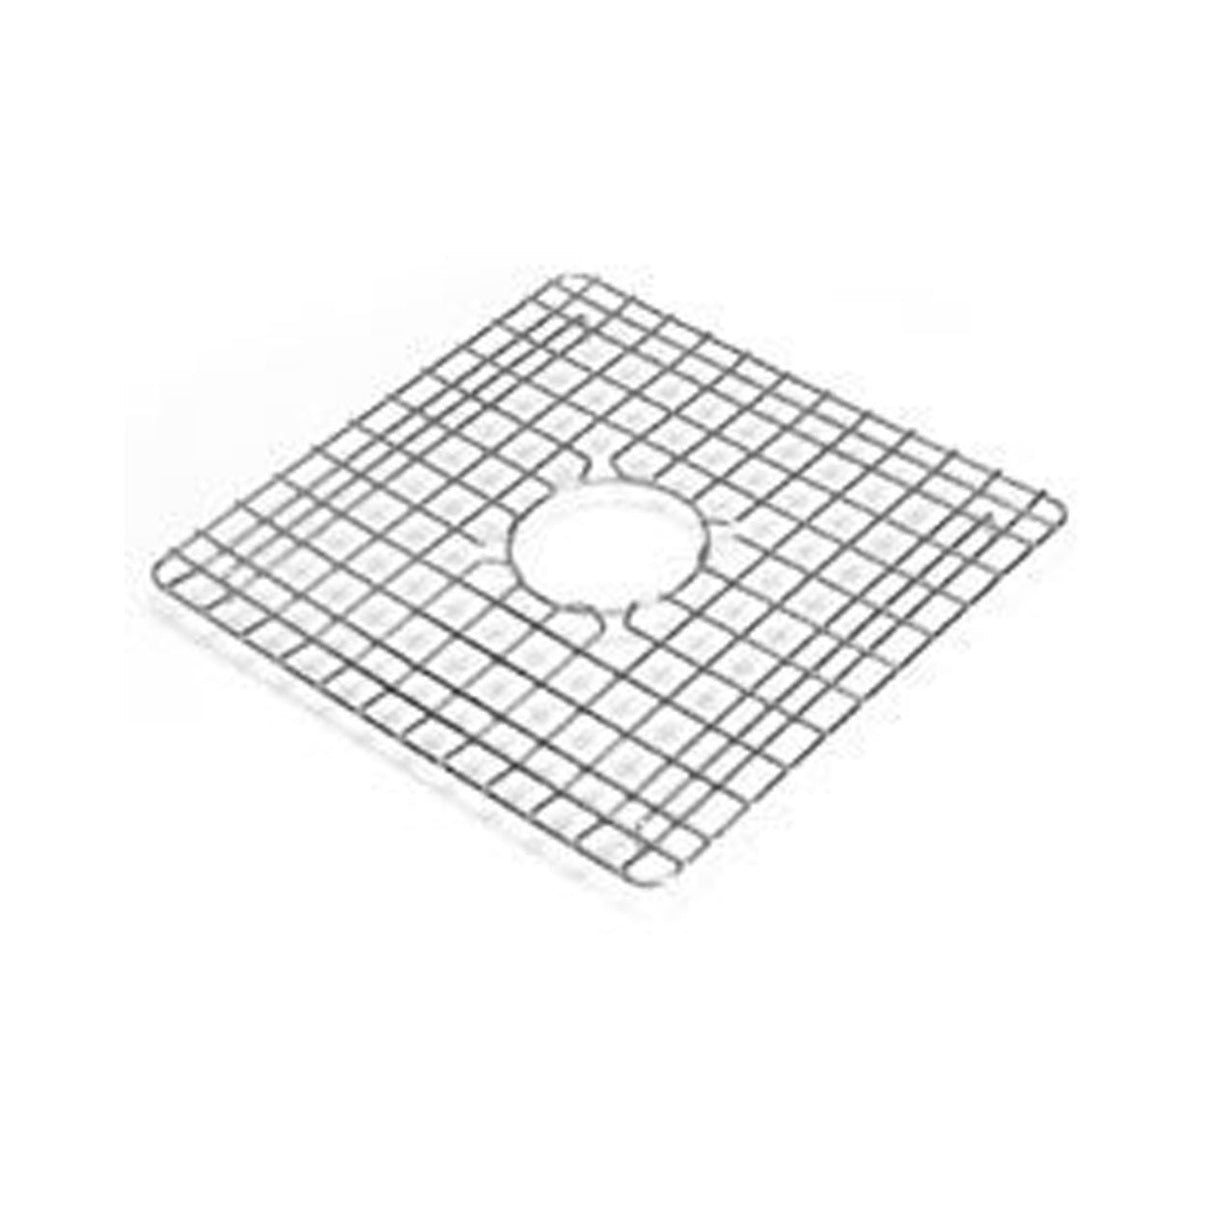 FRANKE MH33-36S 29.1-in. x 15.8-in. Stainless Steel Bottom Sink Grid for Manor House MHX710-33 Stainless Sink In Stainless